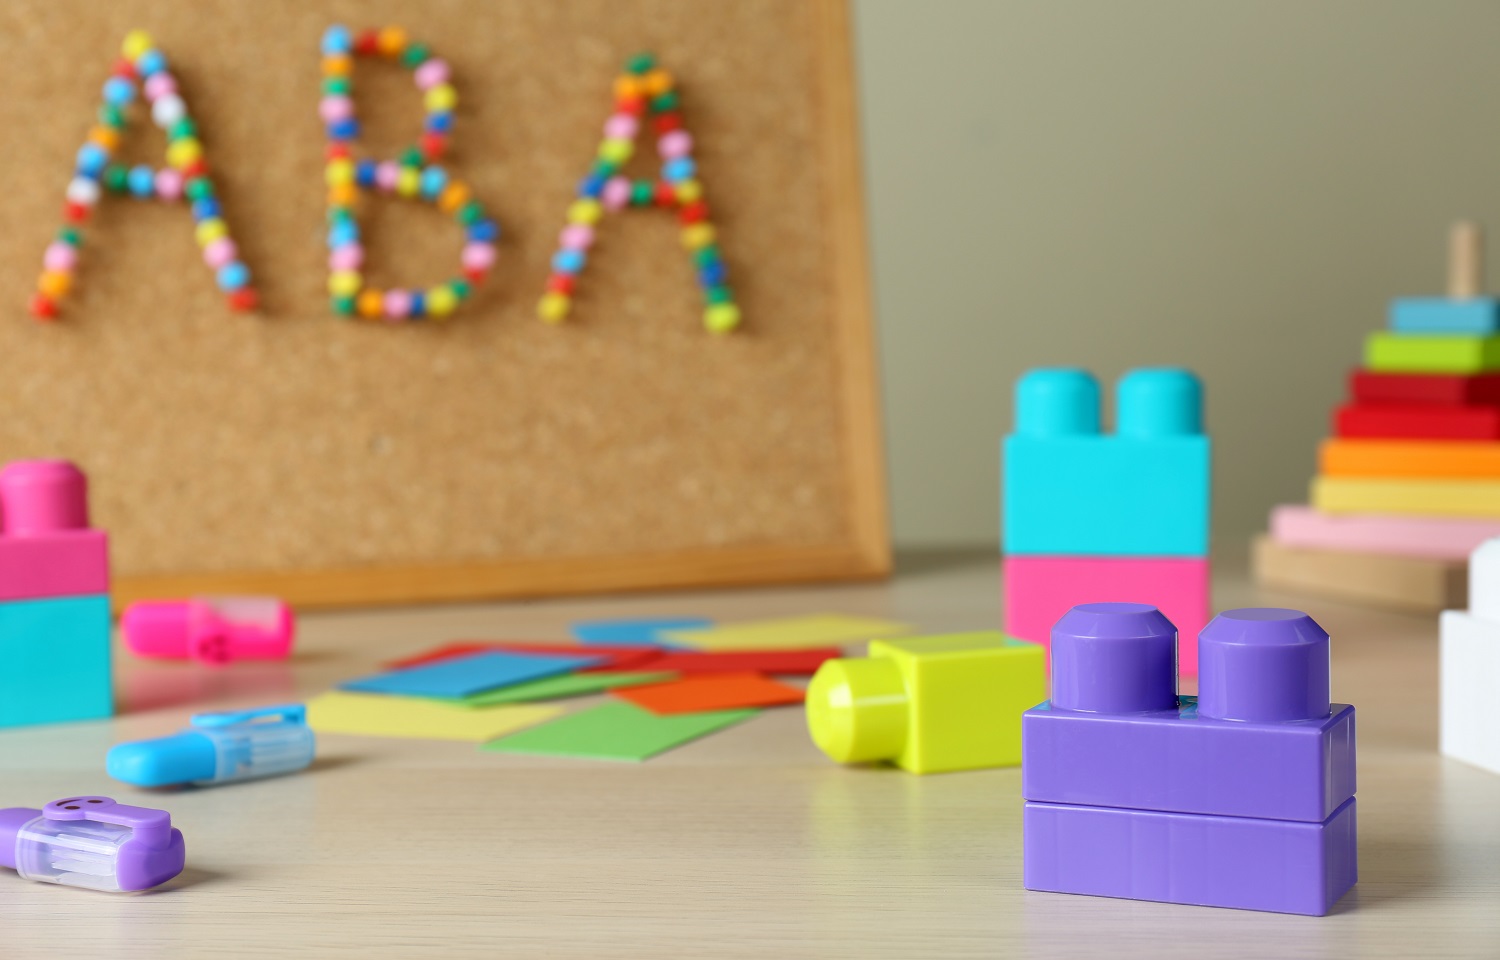 America’s most popular autism therapy may not work and may seriously harm patients’ mental health: cork board with "ABA" spelled out and colorful building blocks in foreground